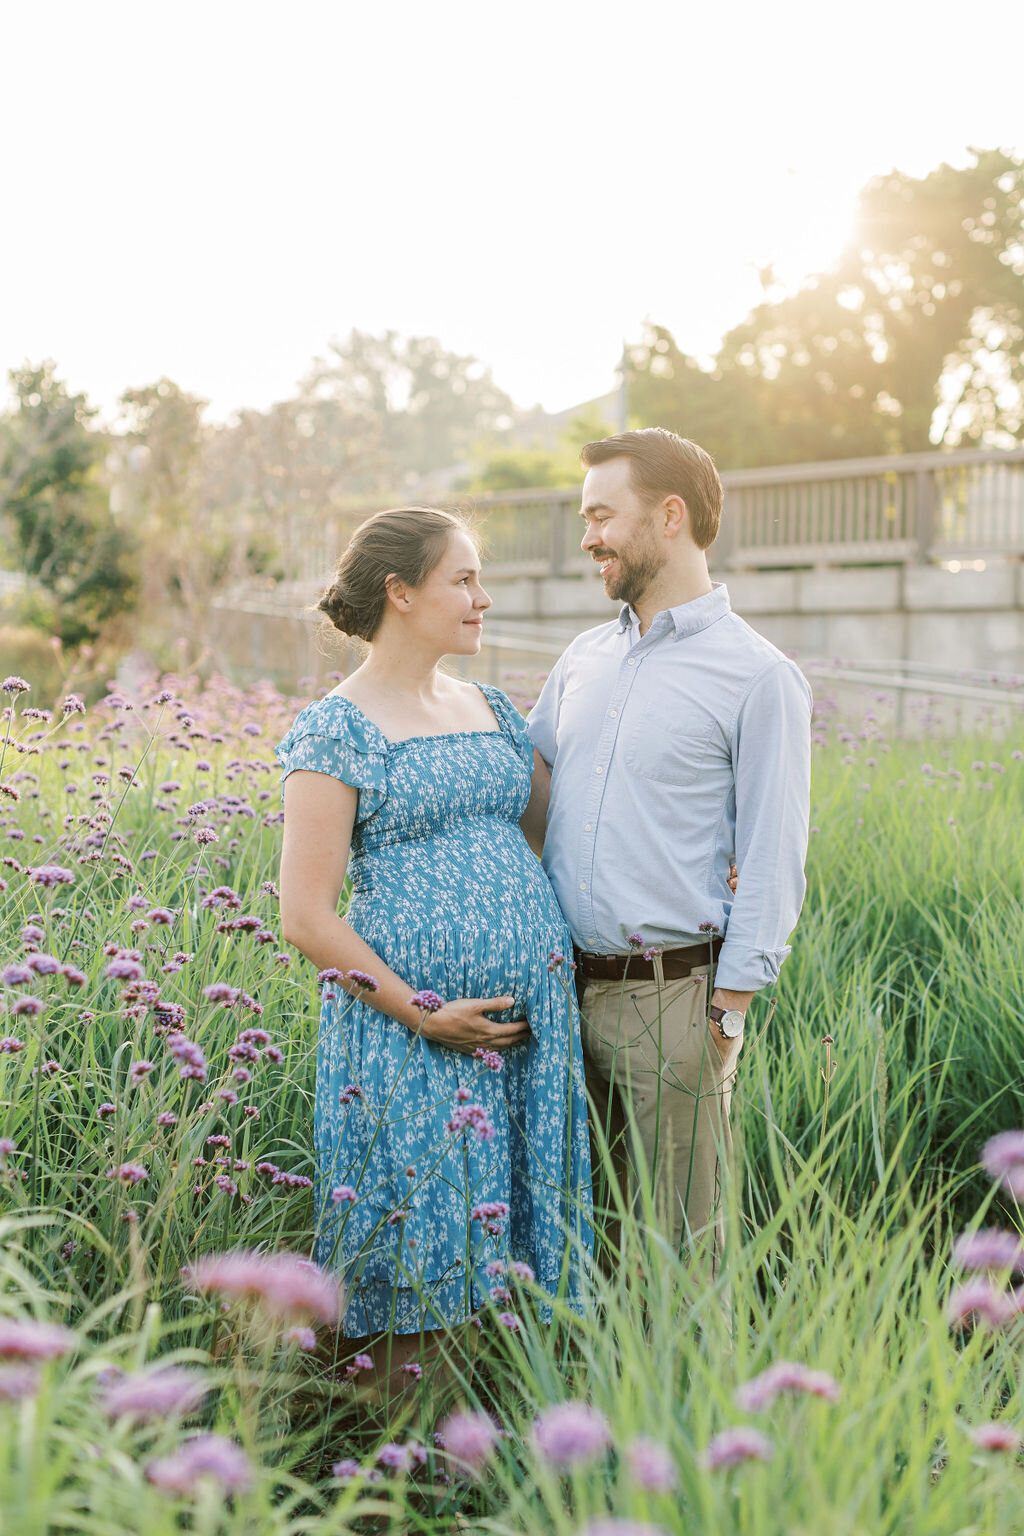 Pregnant wife looks at husband in a field of flowers outside the national mall